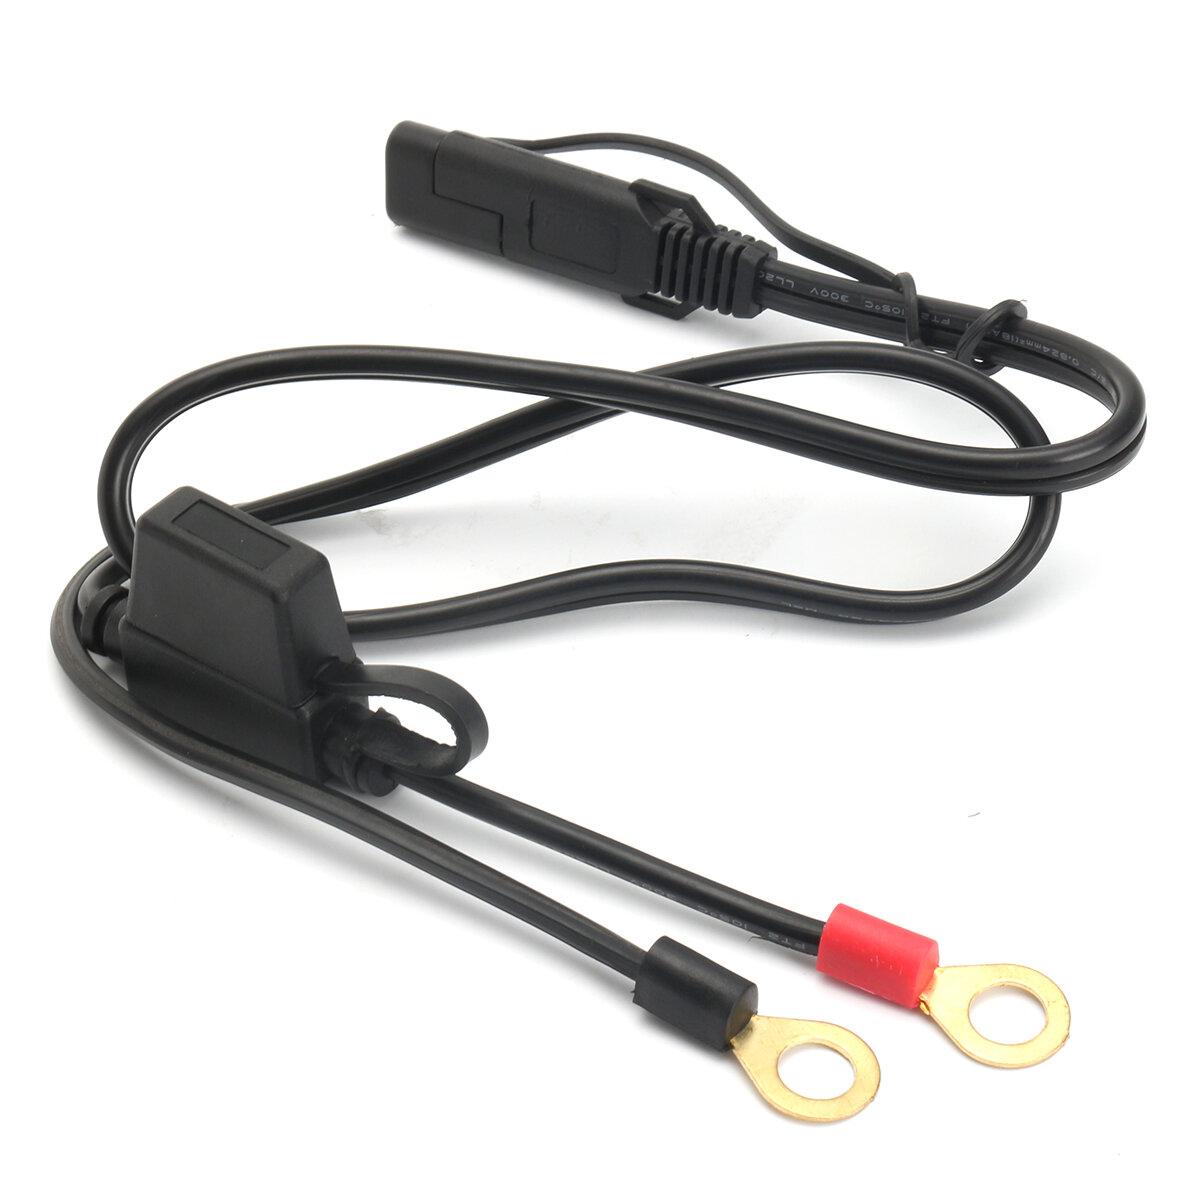 Motorcycle Battery Terminal Ring Connector Harness 12v Charger Adapter Cable Sale Banggood Com Sold Out Arrival Notice Arrival Notice